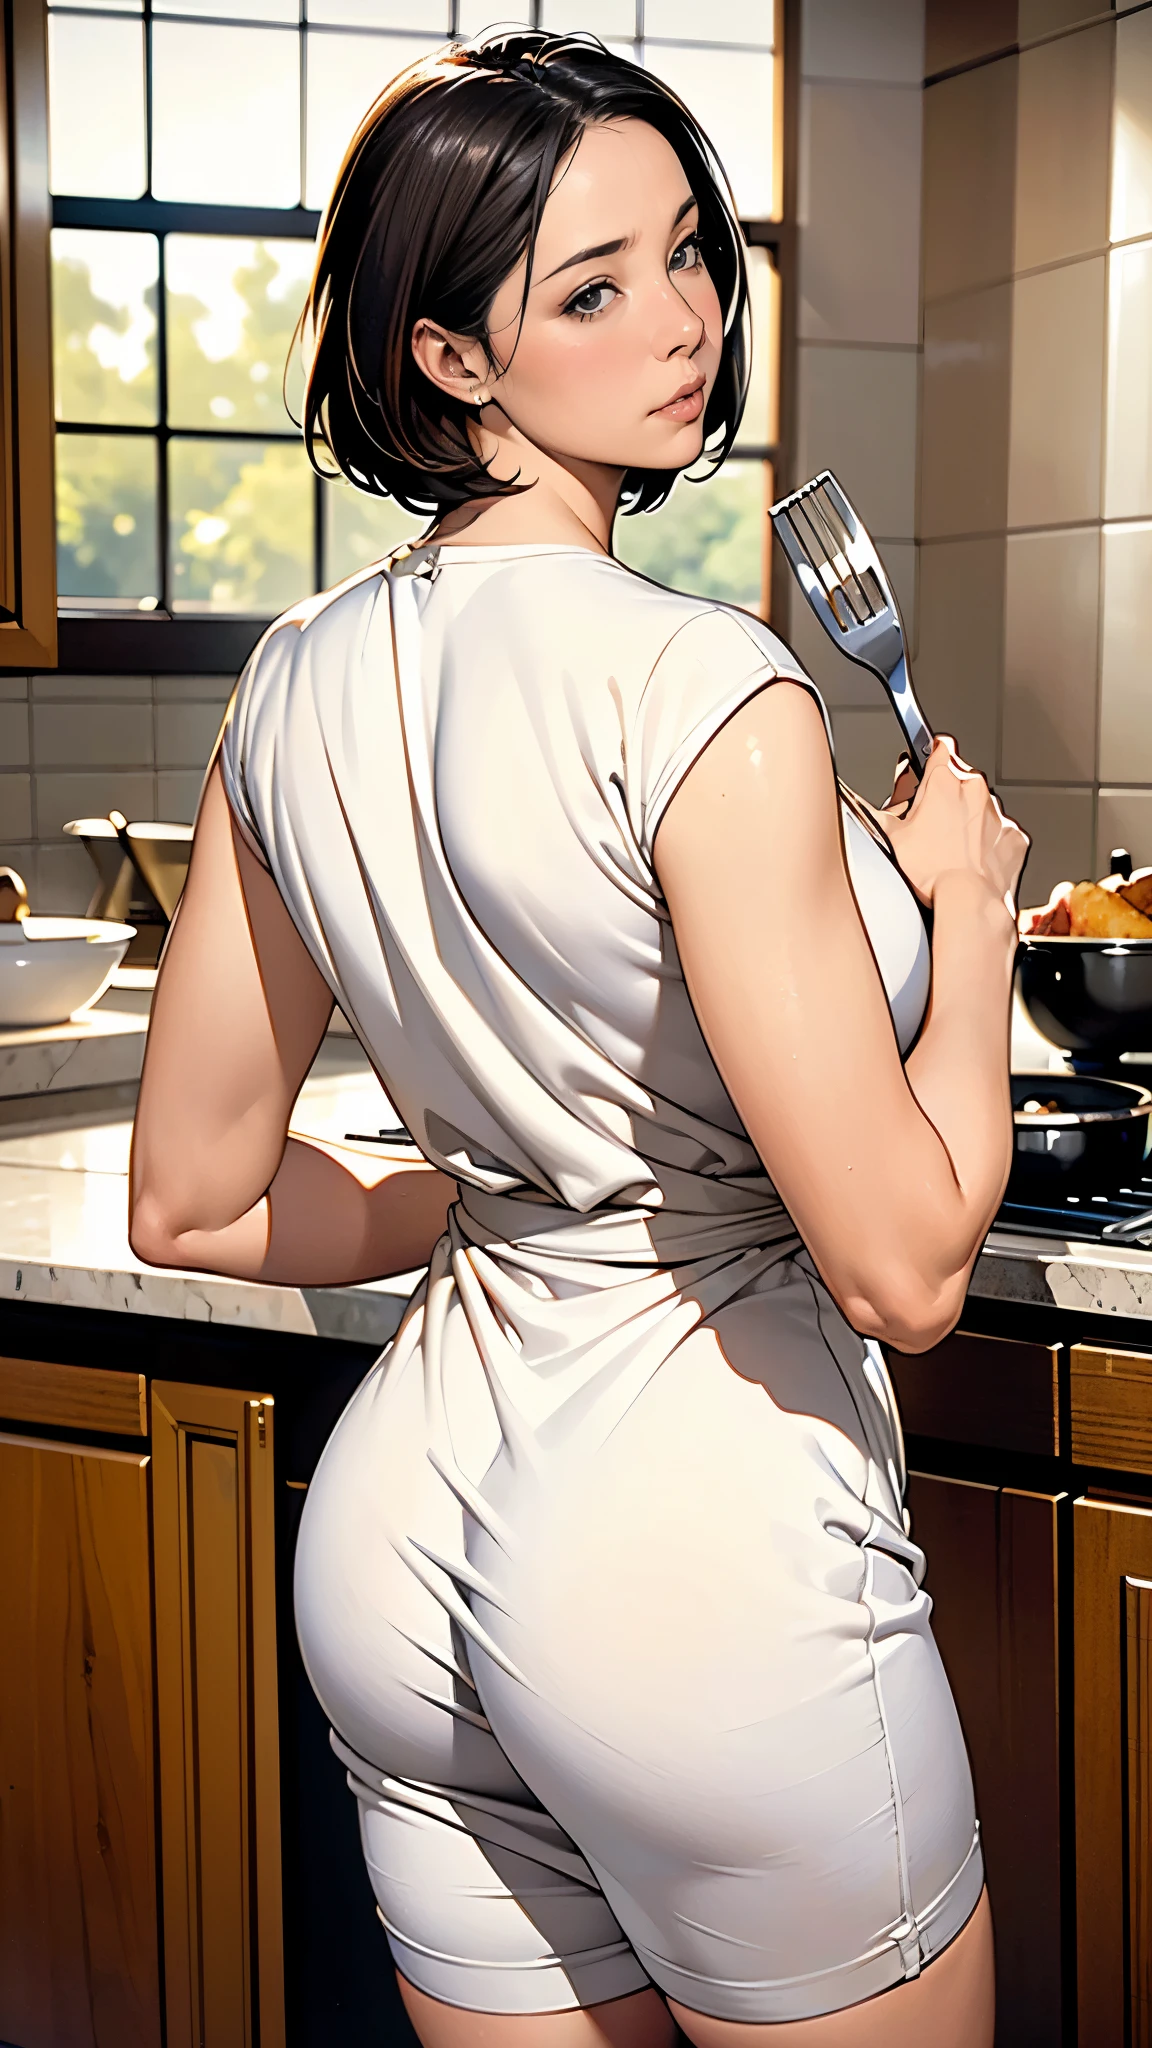 (masterpiece:1.2, highest quality), (Realistic, photoRealistic:1.4),1 female,Mature Woman,48 years old,(((Woman cooking))),((Have cooking utensils)),(Short Bob),(Loungewear),(Kitchen background),(((Background Blur))),(From the back)